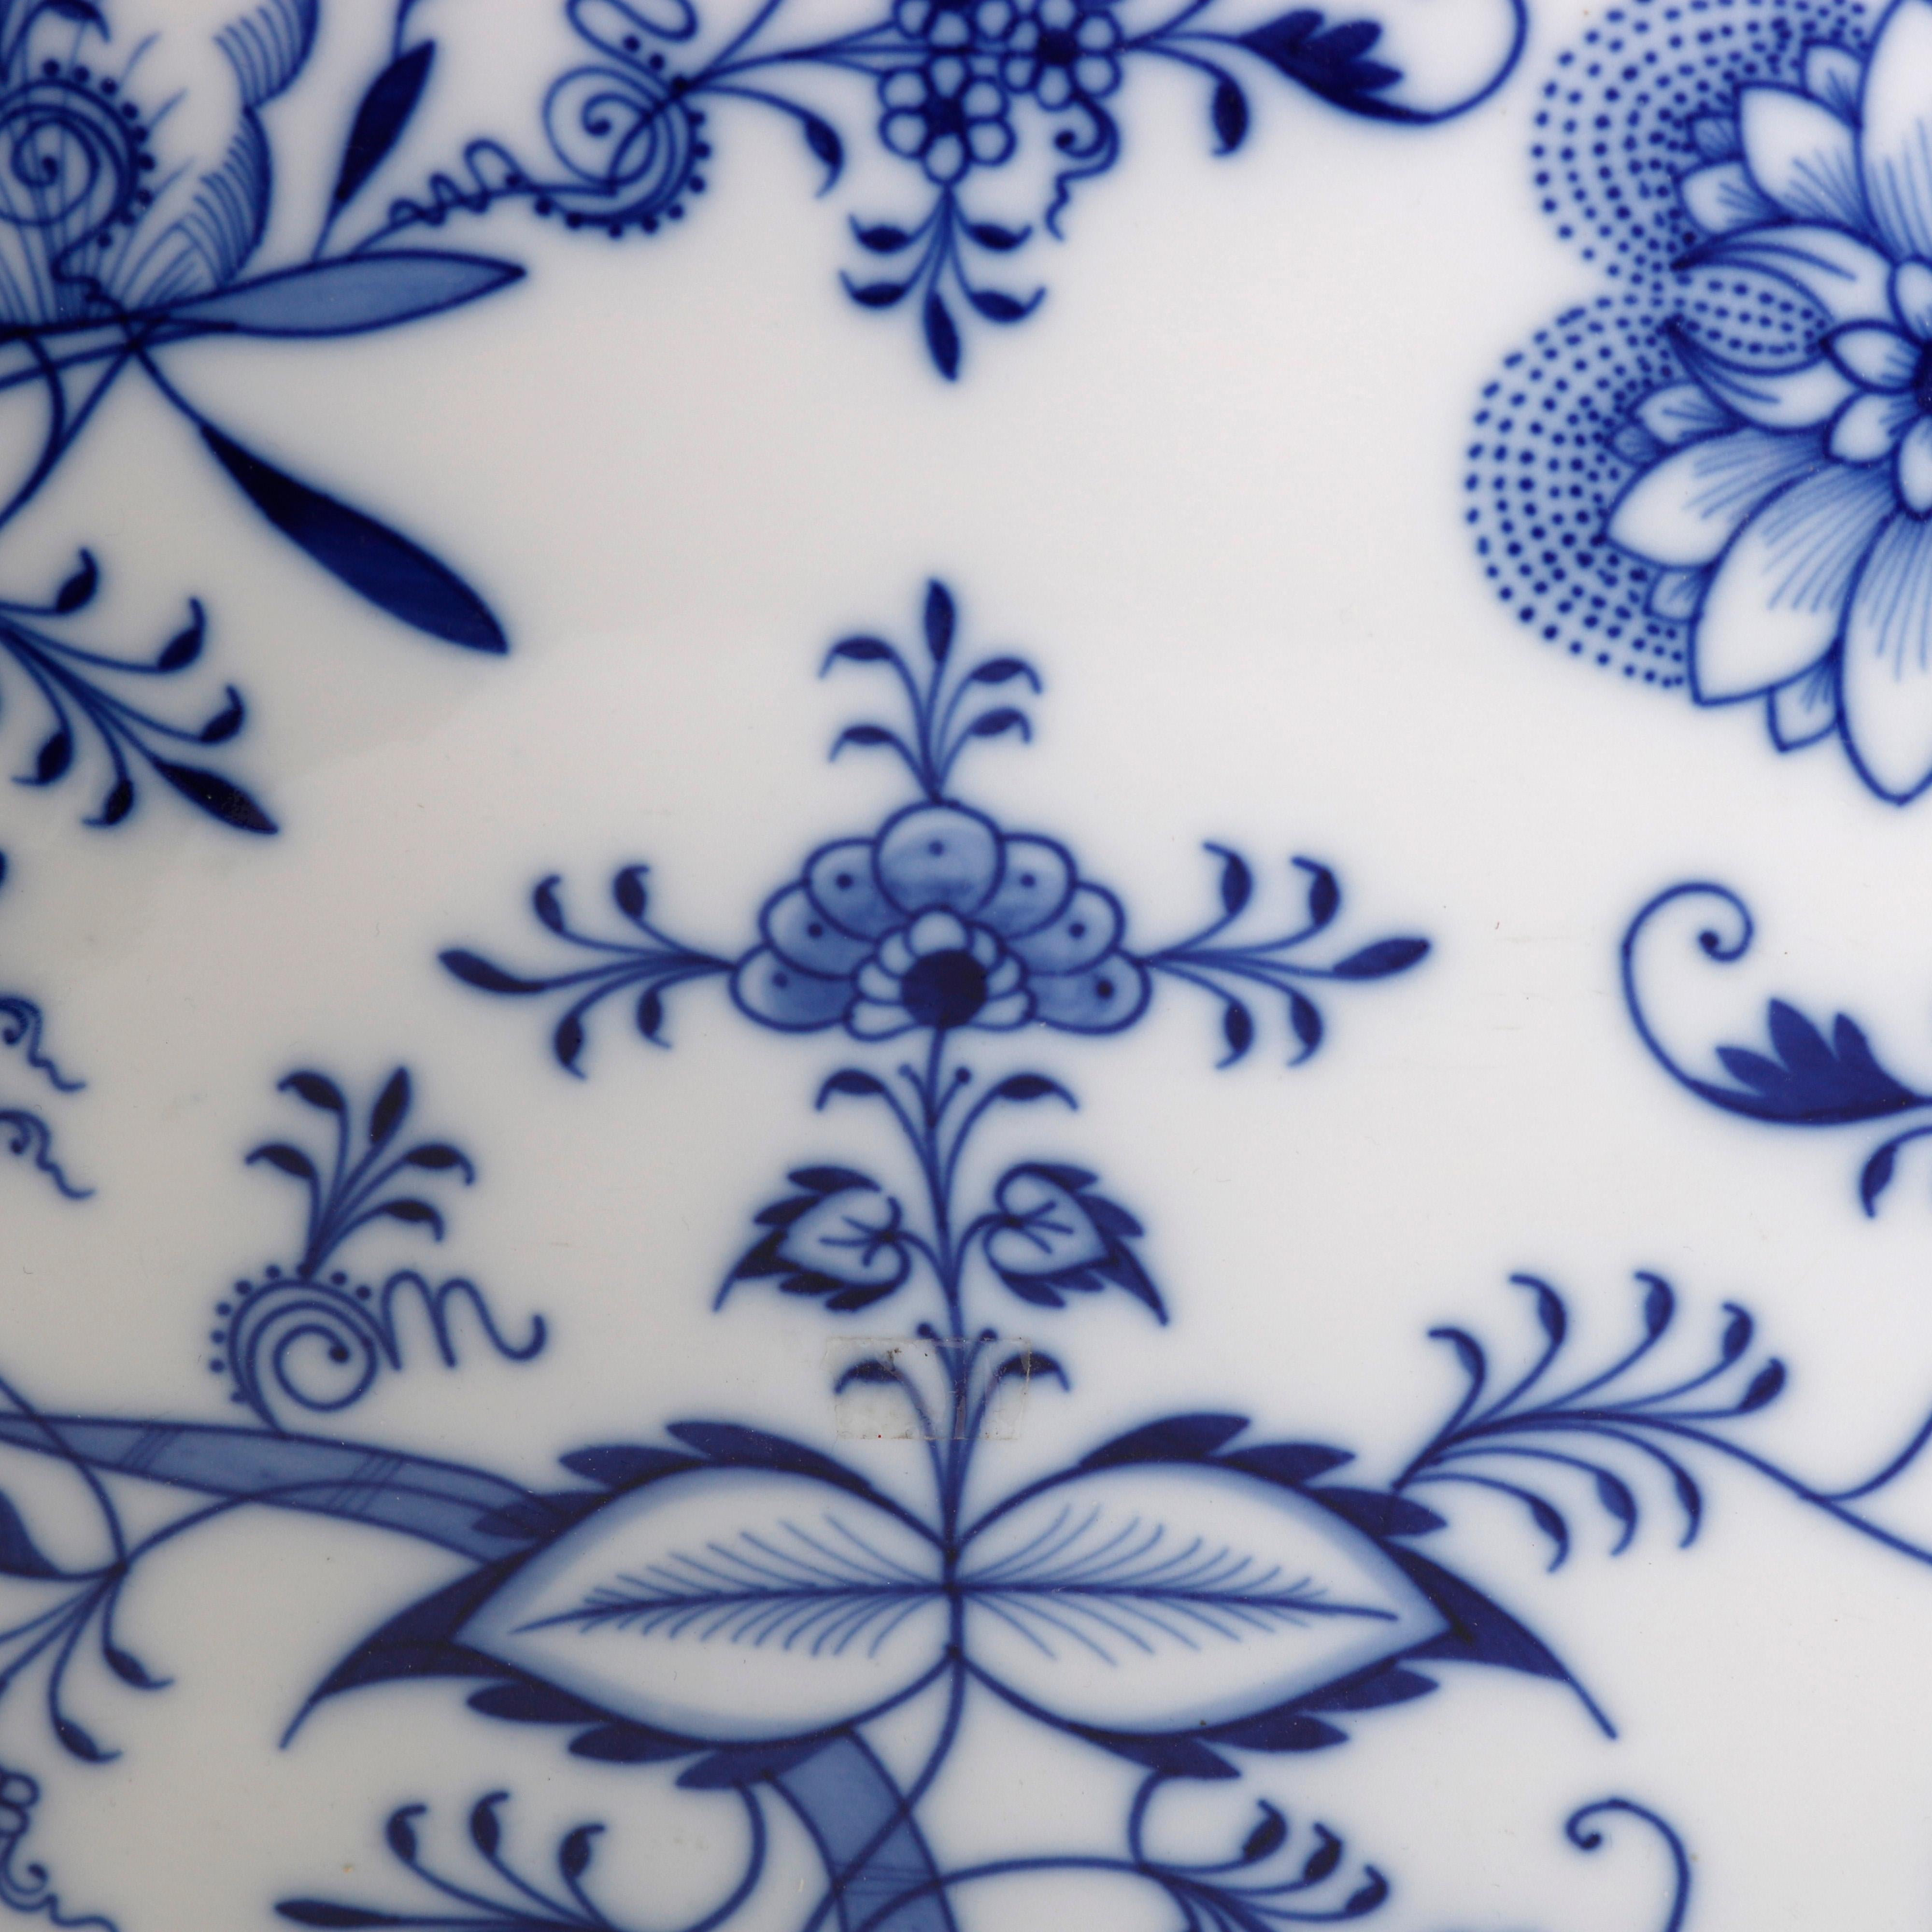 An antique German Meissen platter offers porcelain construction with Blue Onion pattern and scalloped rim, stamped on base as photographed, circa 1900

Measures- 21.25